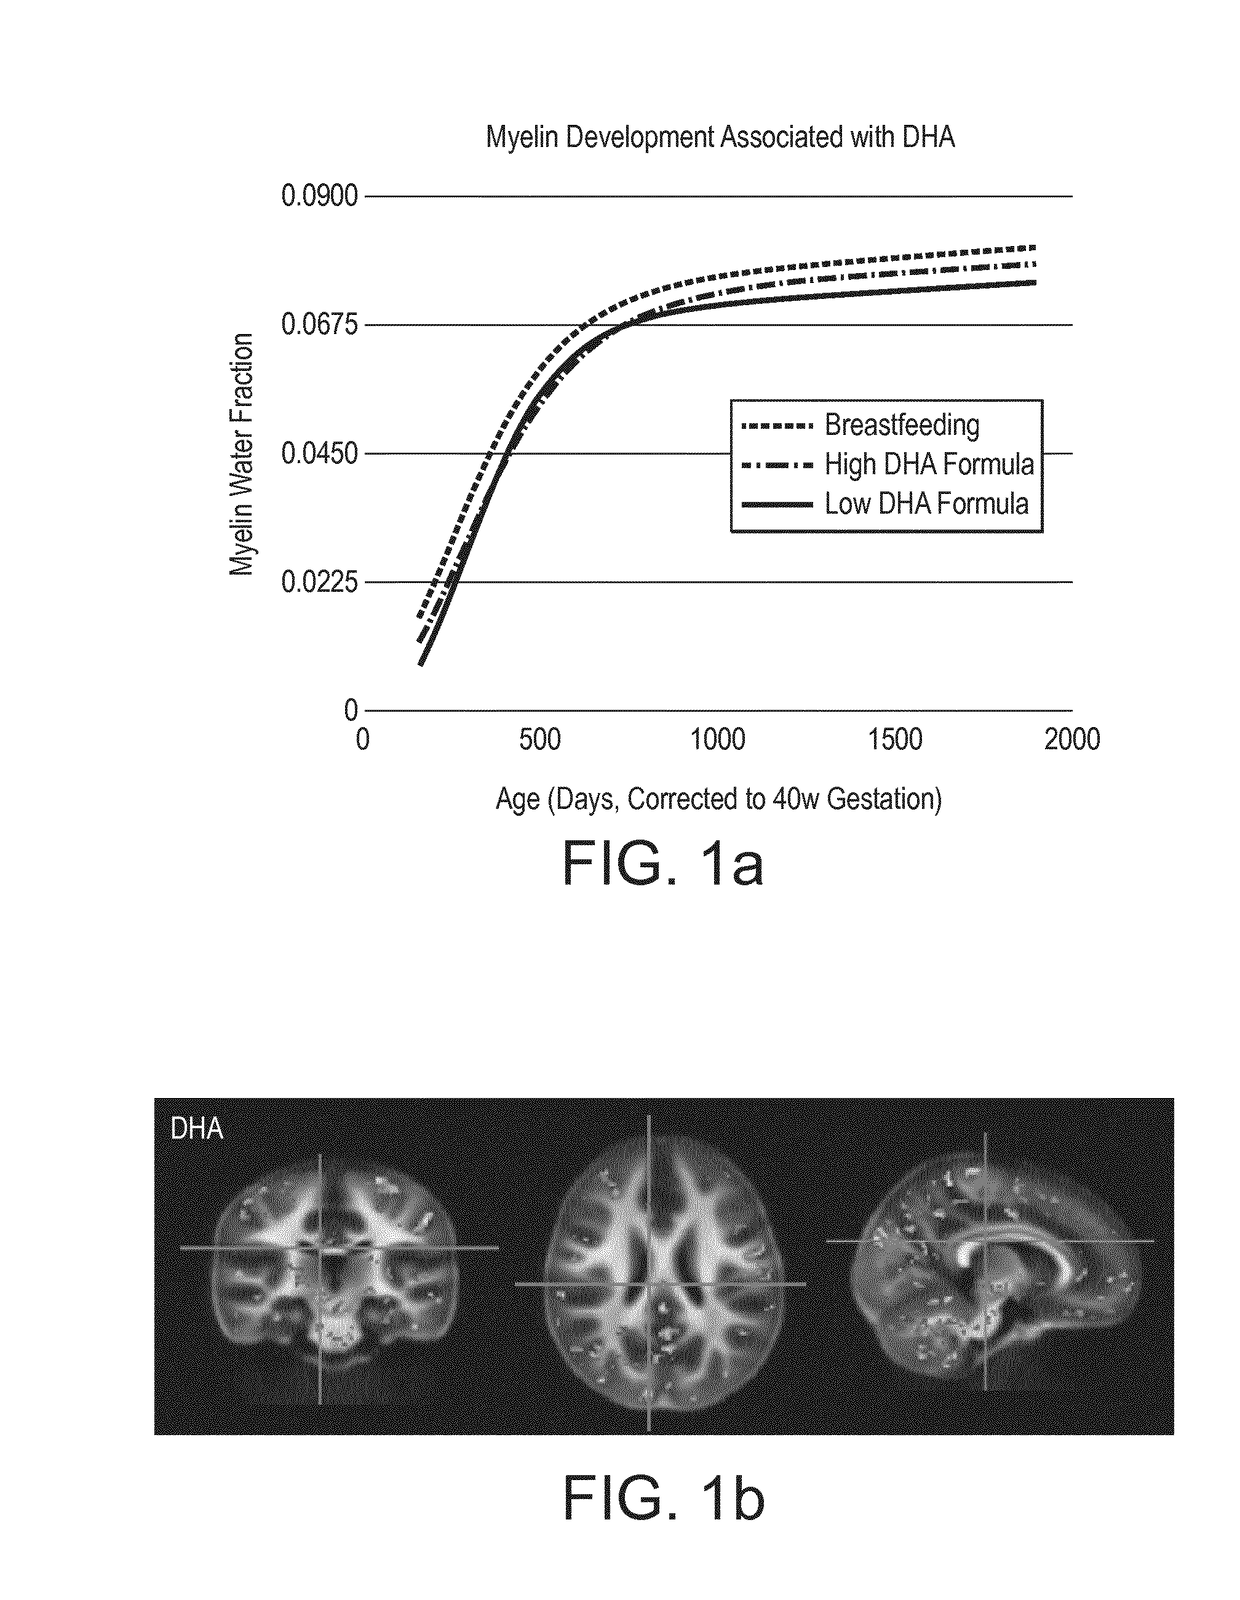 Nutritional composition and infant formula for promoting myelination of the brain